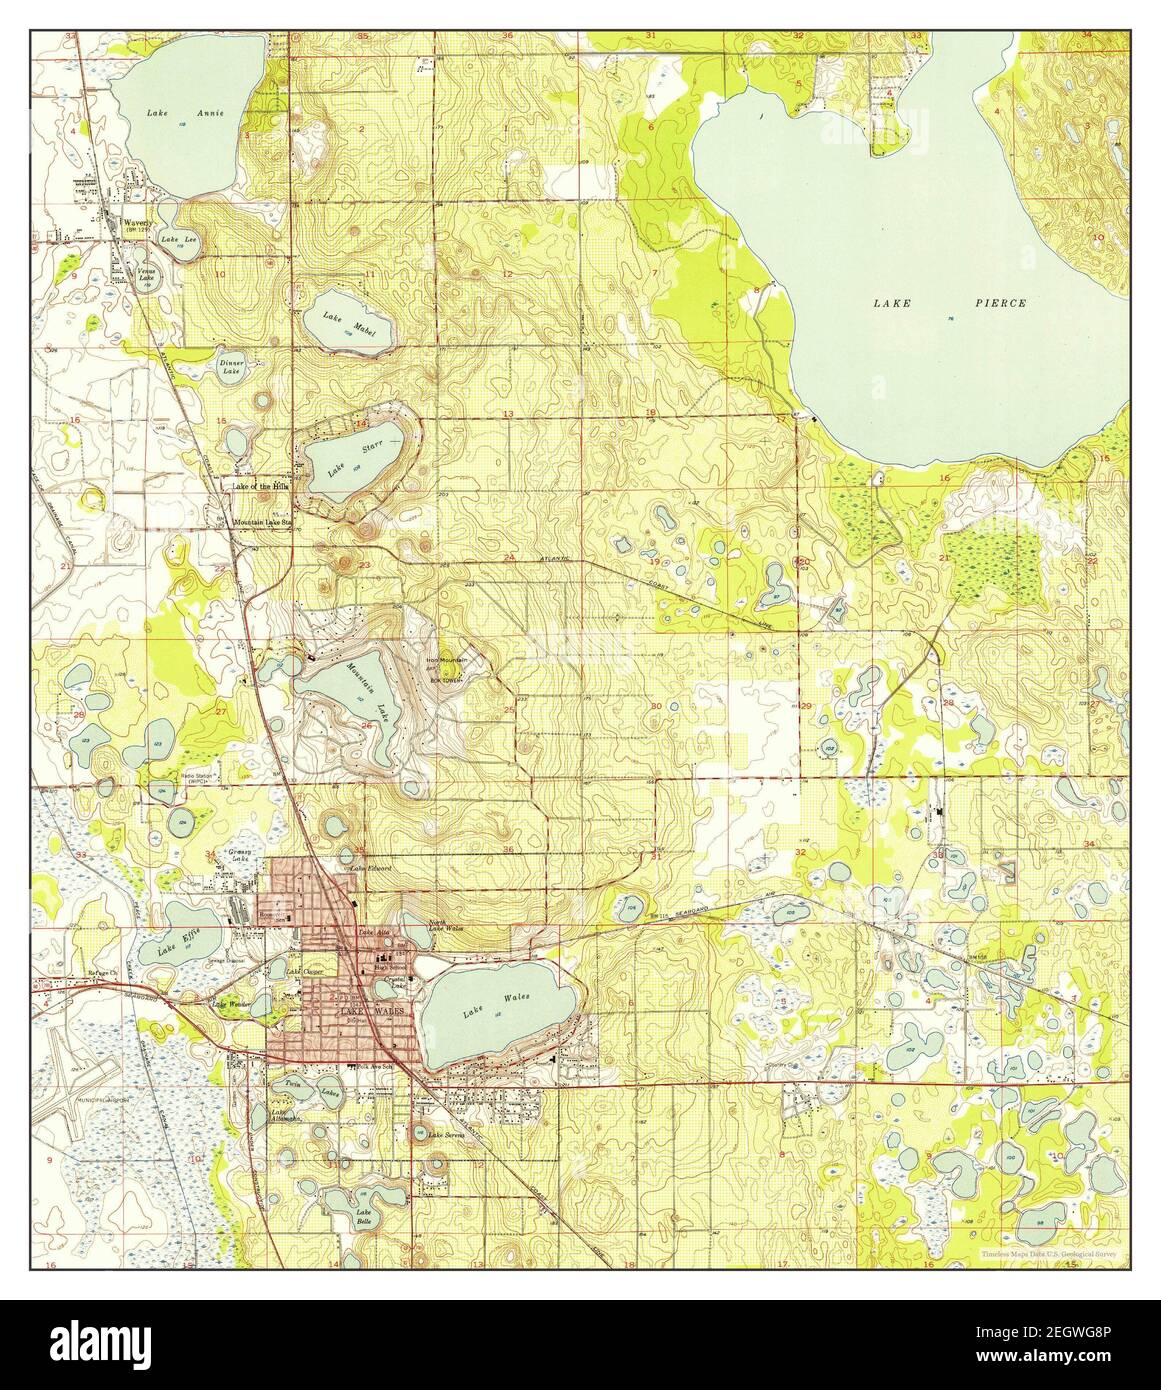 Lake Wales, Florida, map 1952, 1:24000, United States of America by Timeless Maps, data U.S. Geological Survey Stock Photo